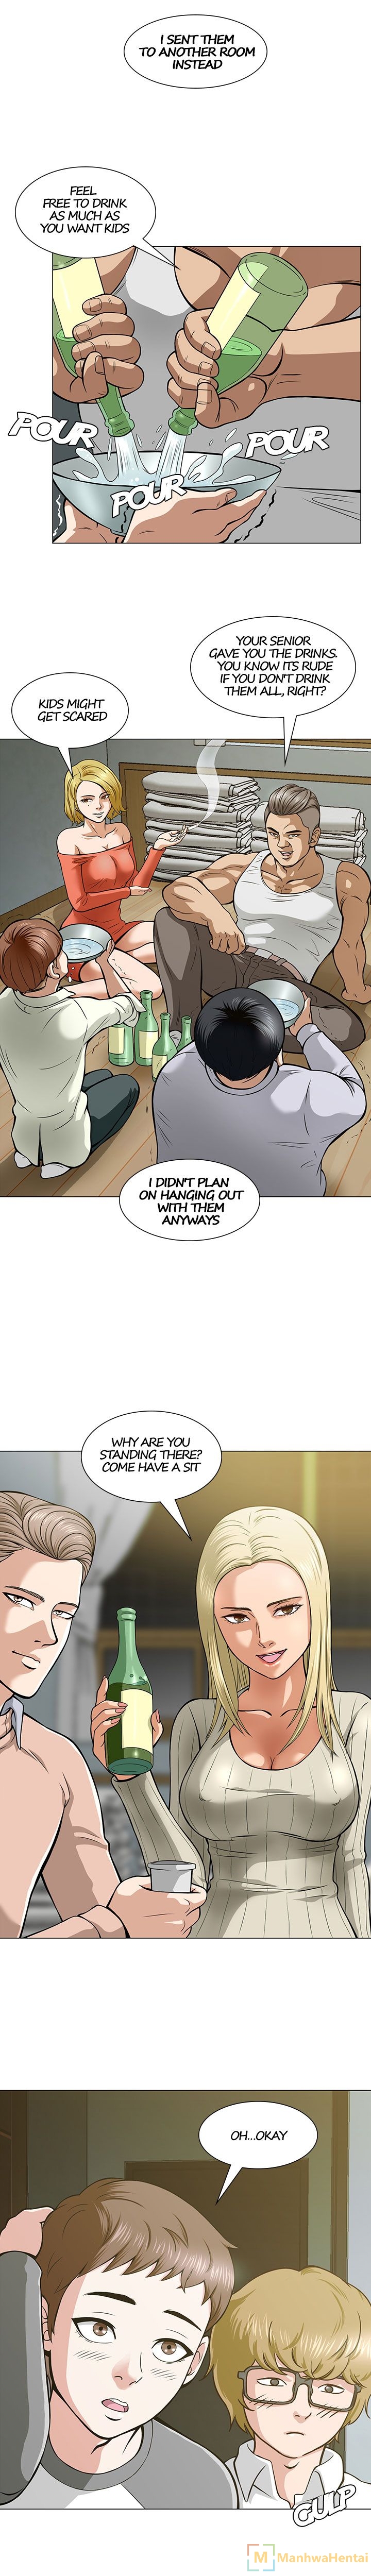 Roomie - Chapter 4 Page 15